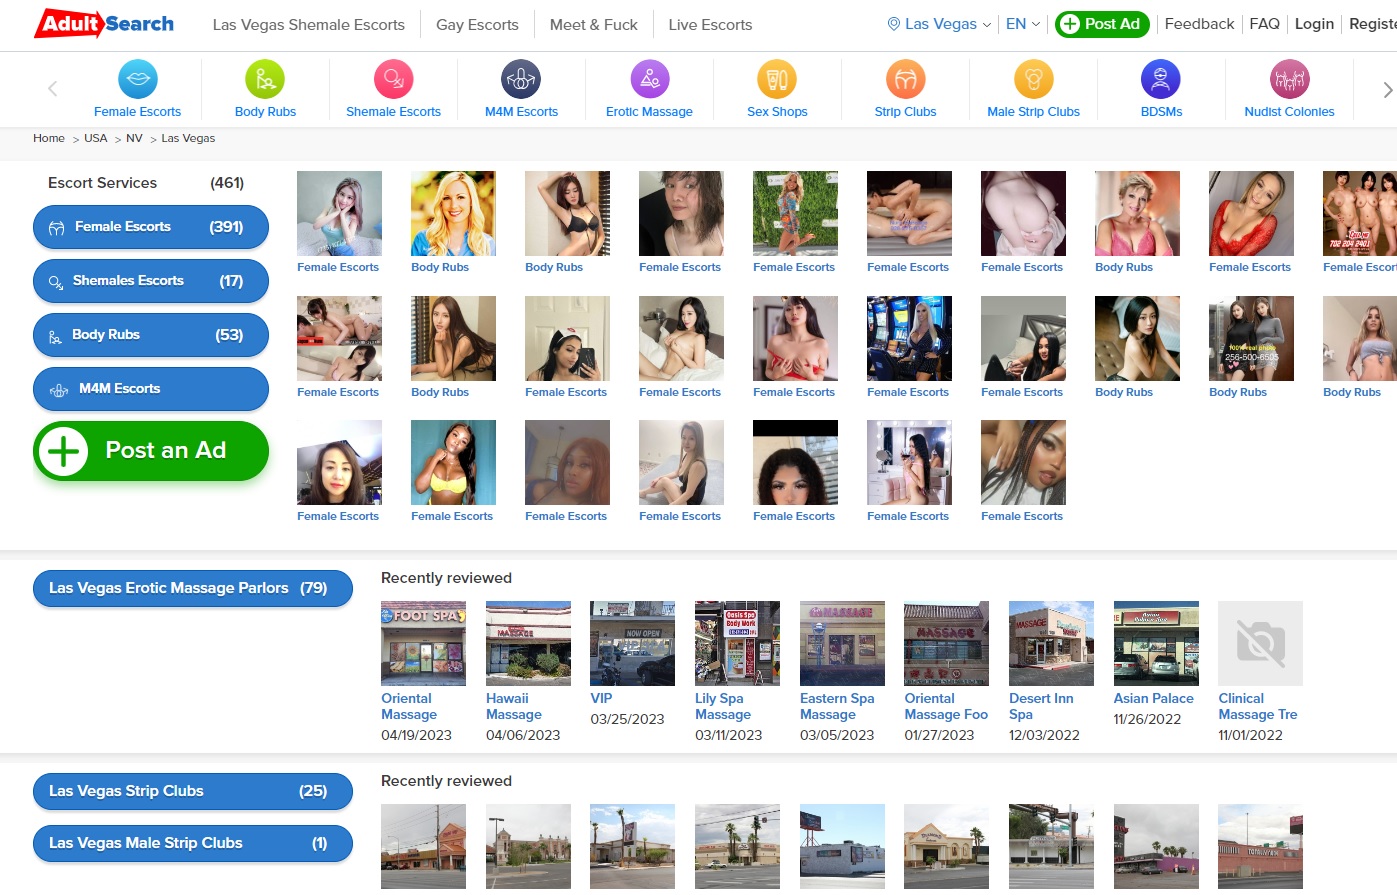 Adultsearch dating platform for casual encounters